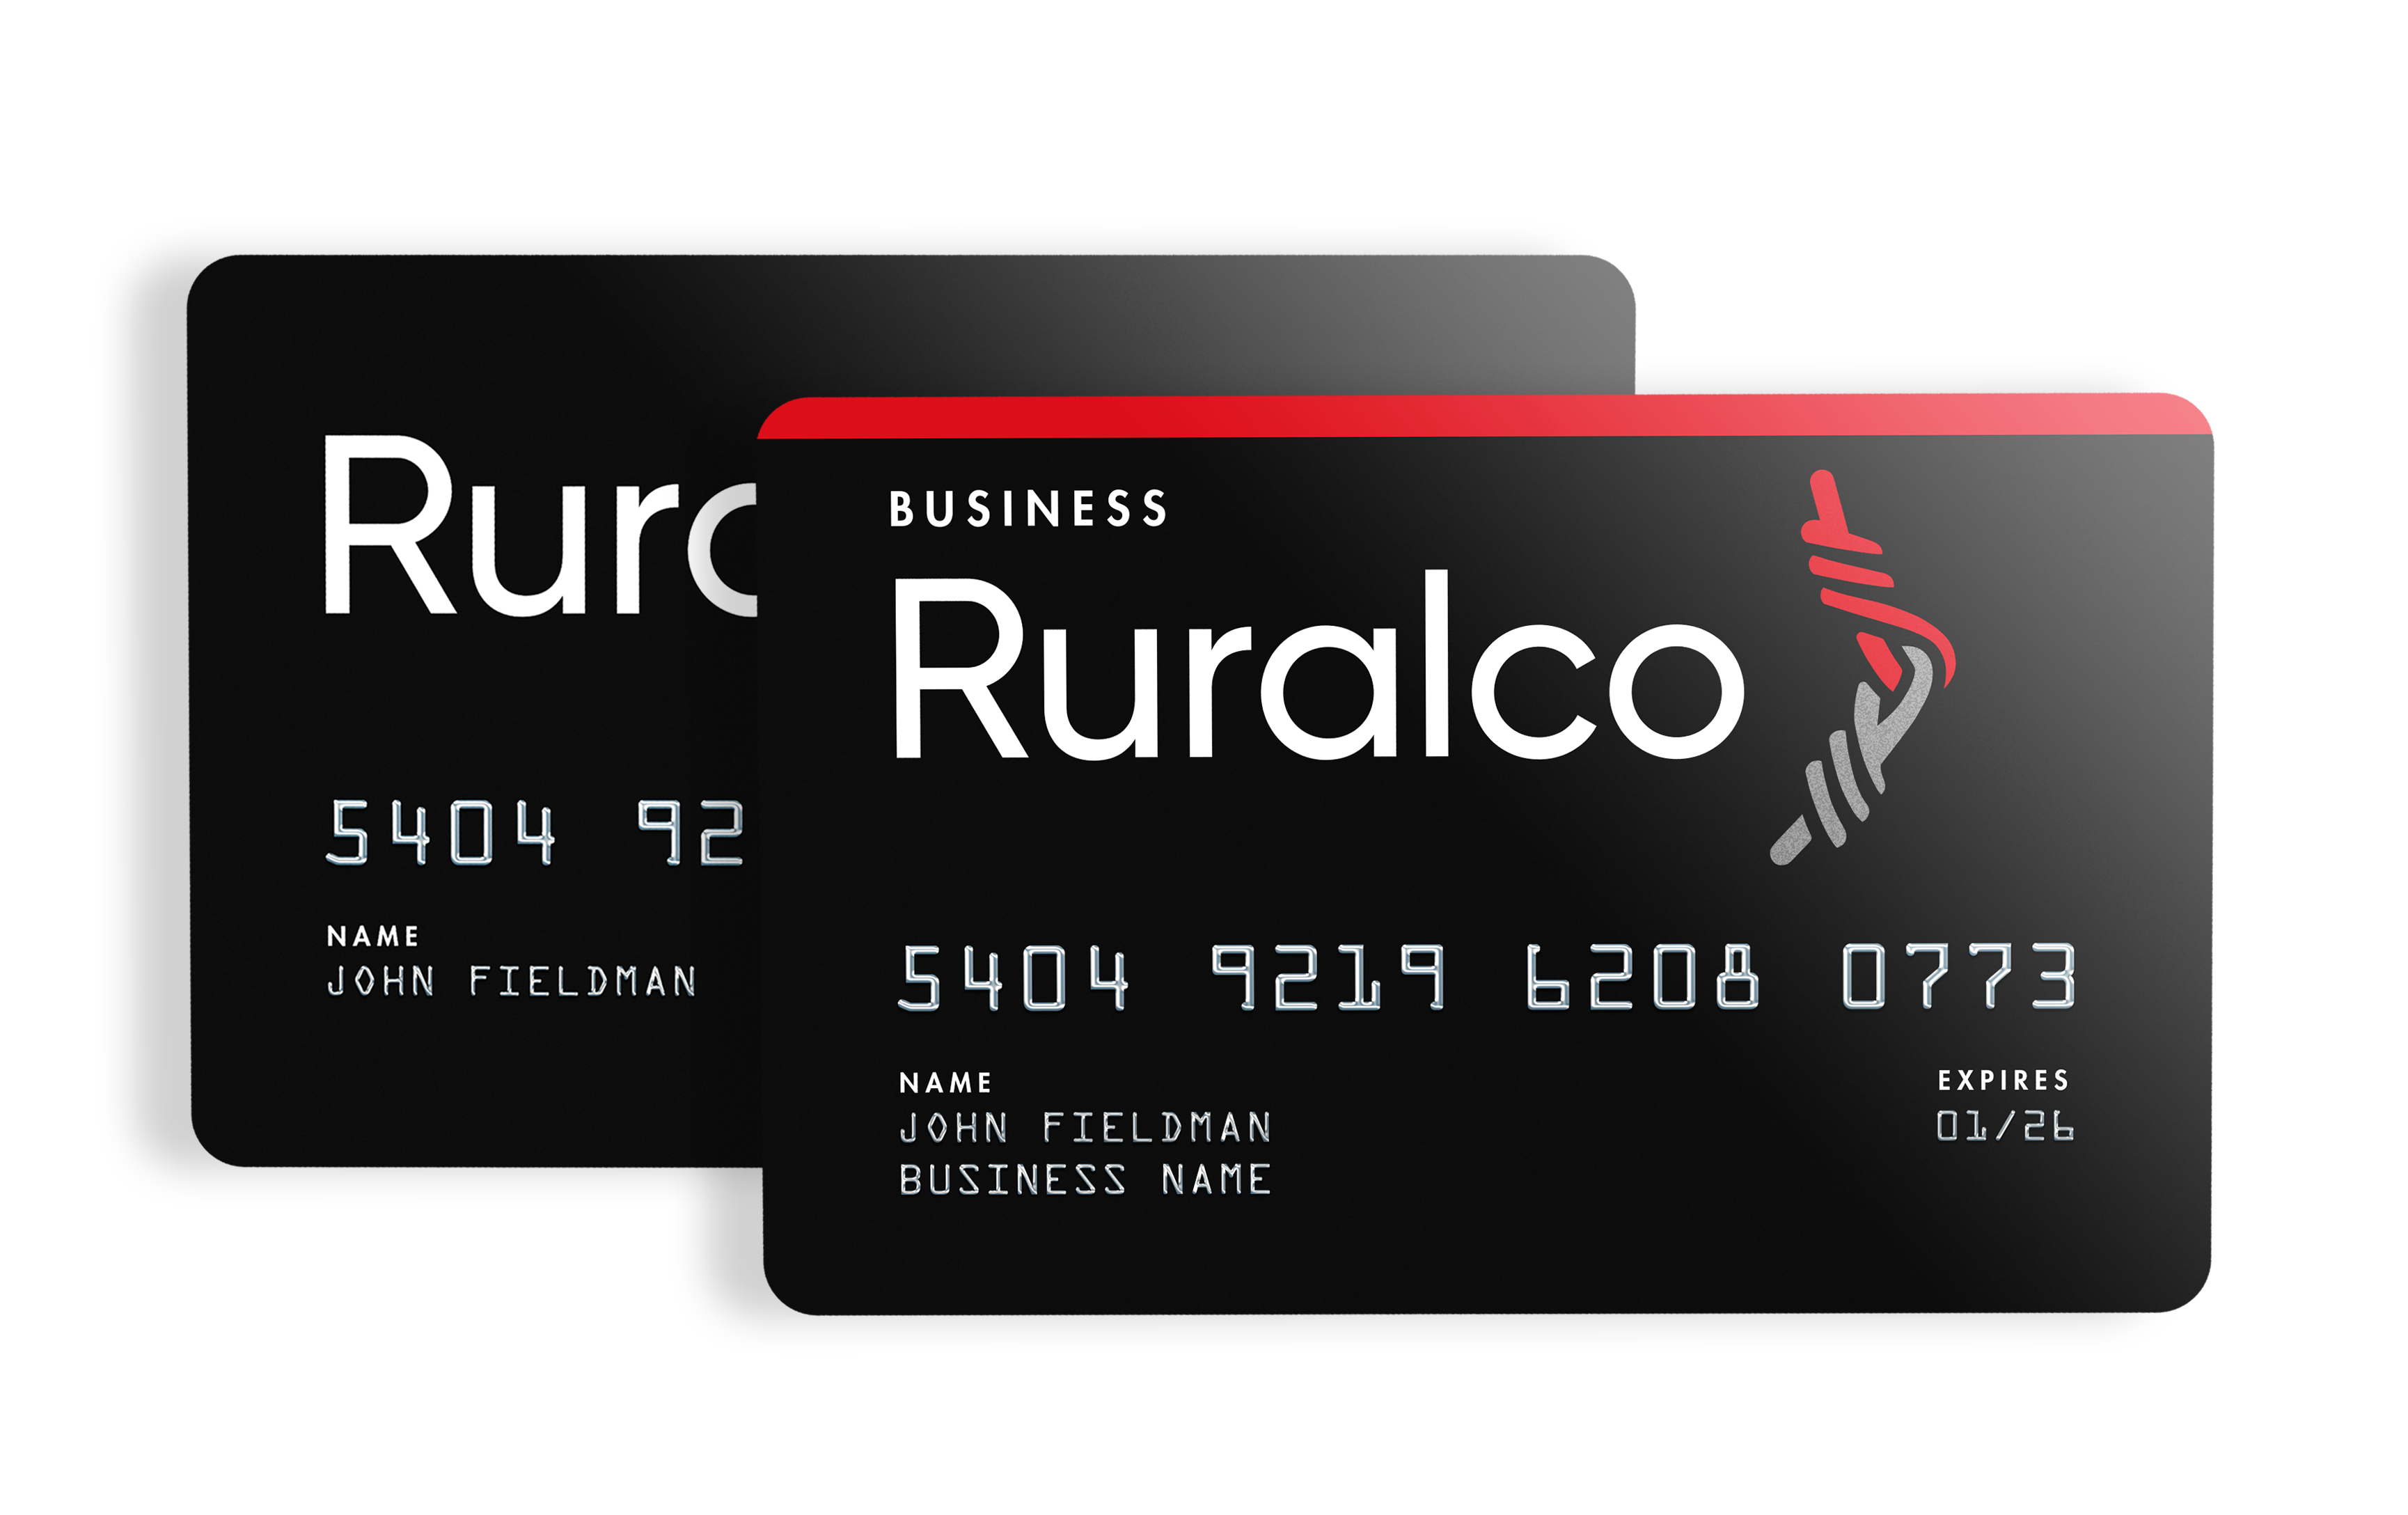 Ruralco credit cards